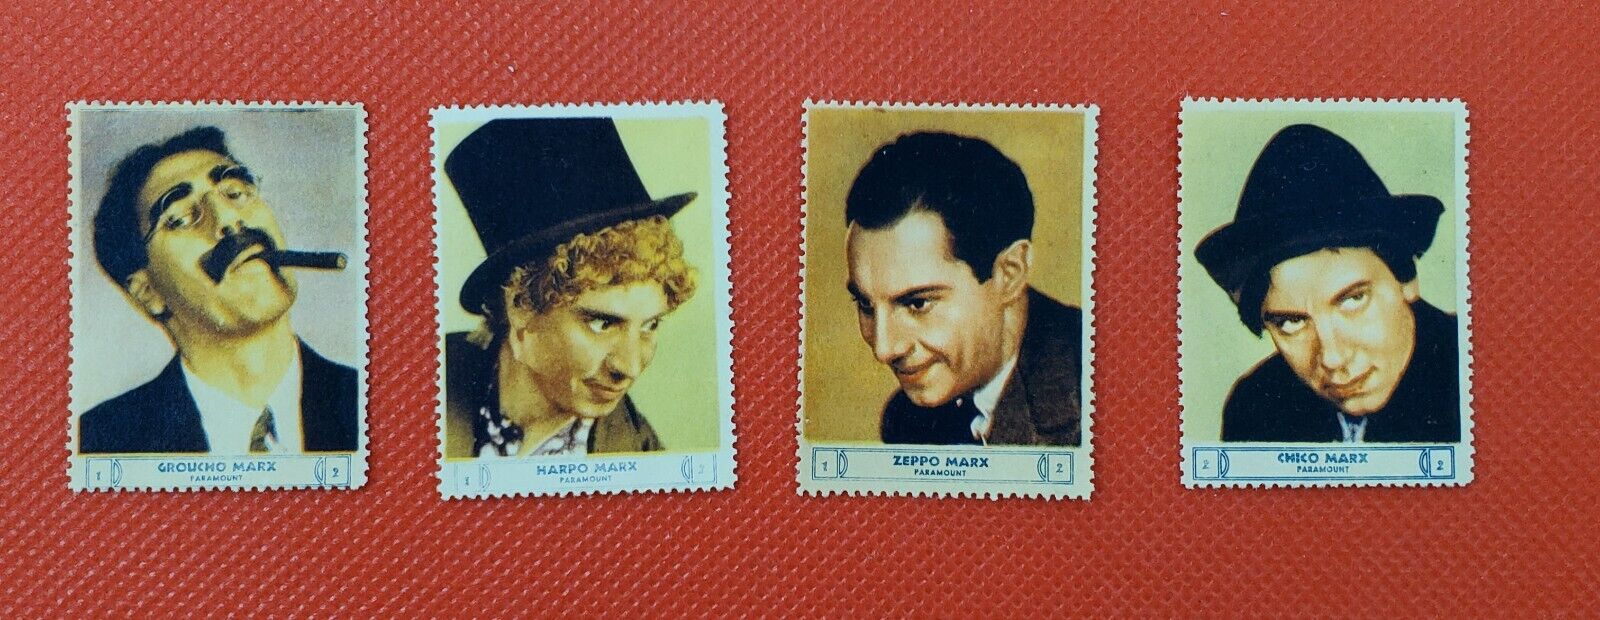 1932 Marx Brothers Groucho Harpo Chico Zeppo Stamps National Screen Hollywood